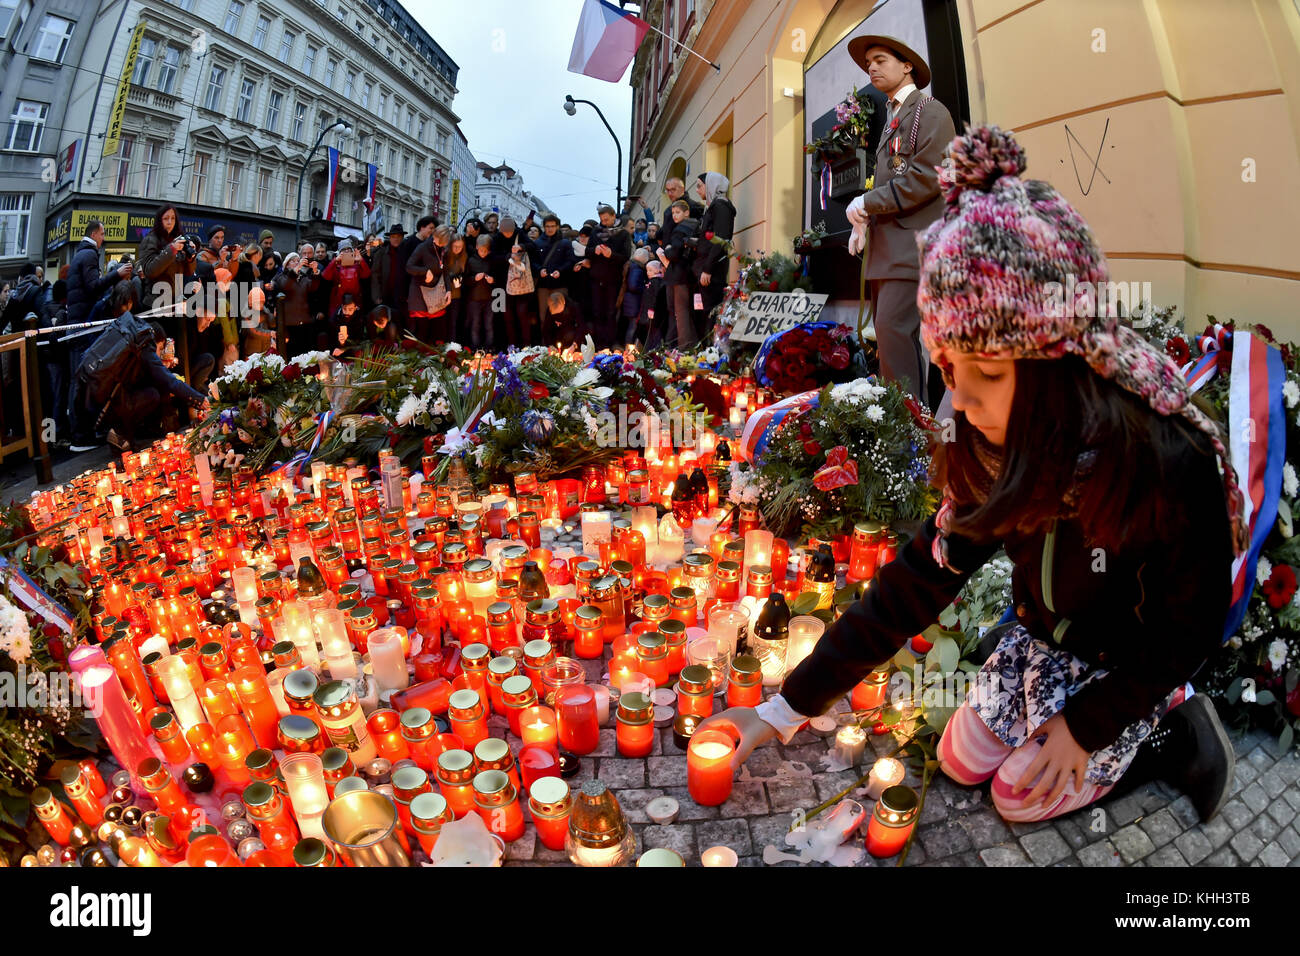 Thousands of people light candles as they pay respect to the 1989 events that lead to fall of communism in front of the memorial plaque marking the November 17, 1989 events on Narodni (National) Street in Prague, Czech Republic, on Friday, November 17, 2017. The Day of Struggle for Freedom and Democracy on November 17 commemorates student demonstrations after the Nazi occupation in 1939 and against the Communist regime in 1989. Communist police cordoned off a student protest march in the Prague centre on November 17, 1989 and then brutally beat up its participants. The police violence triggere Stock Photo